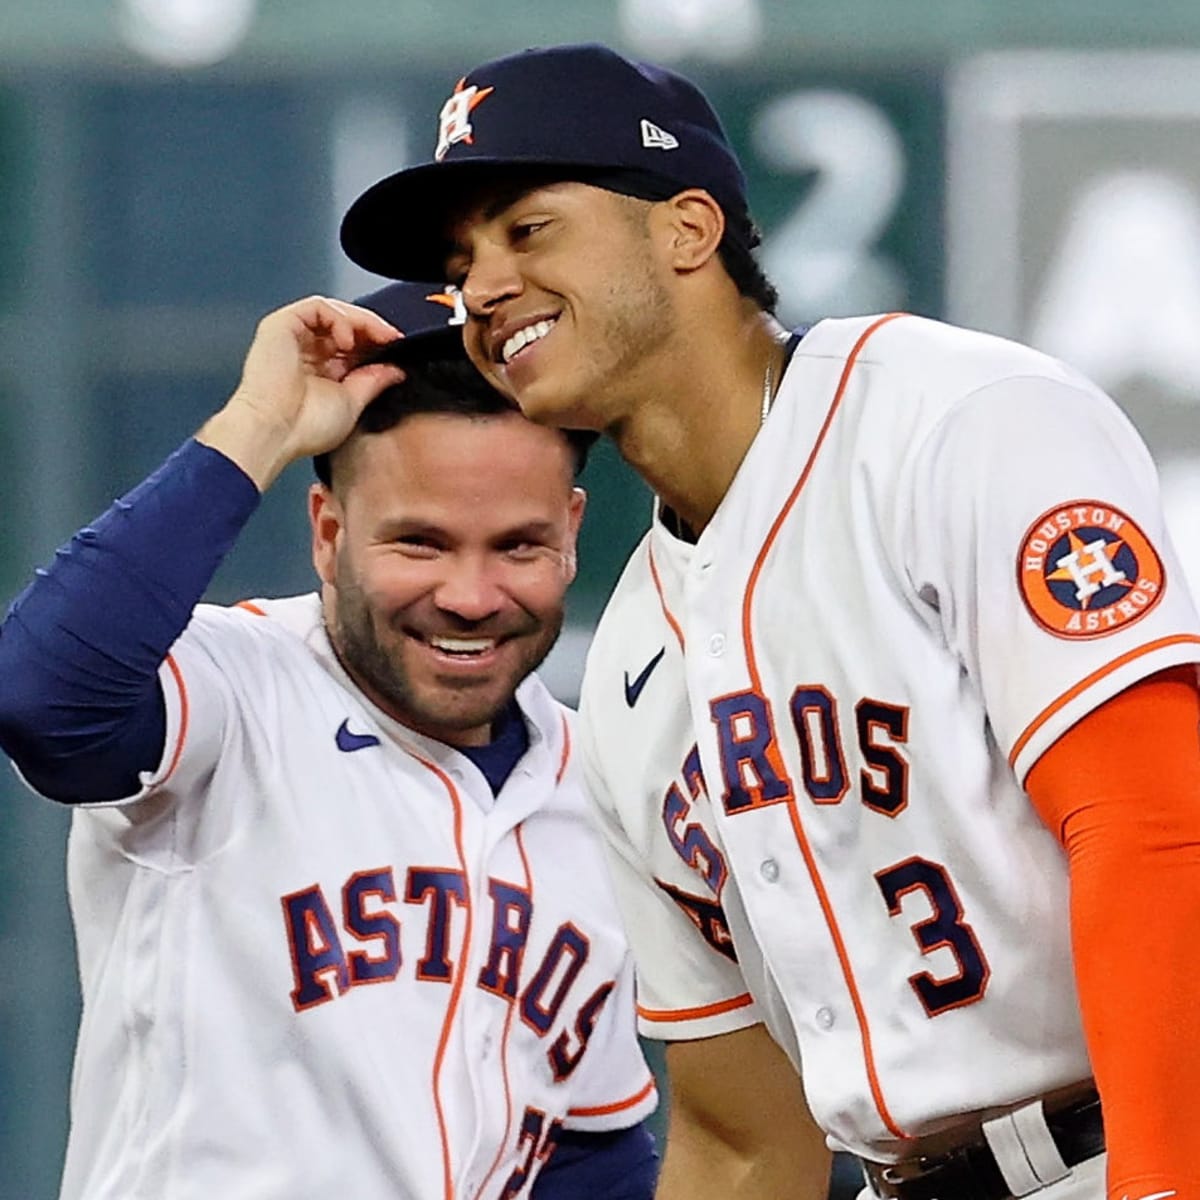 The Astros' Haters Are Running Out of Ammo - Sports Illustrated